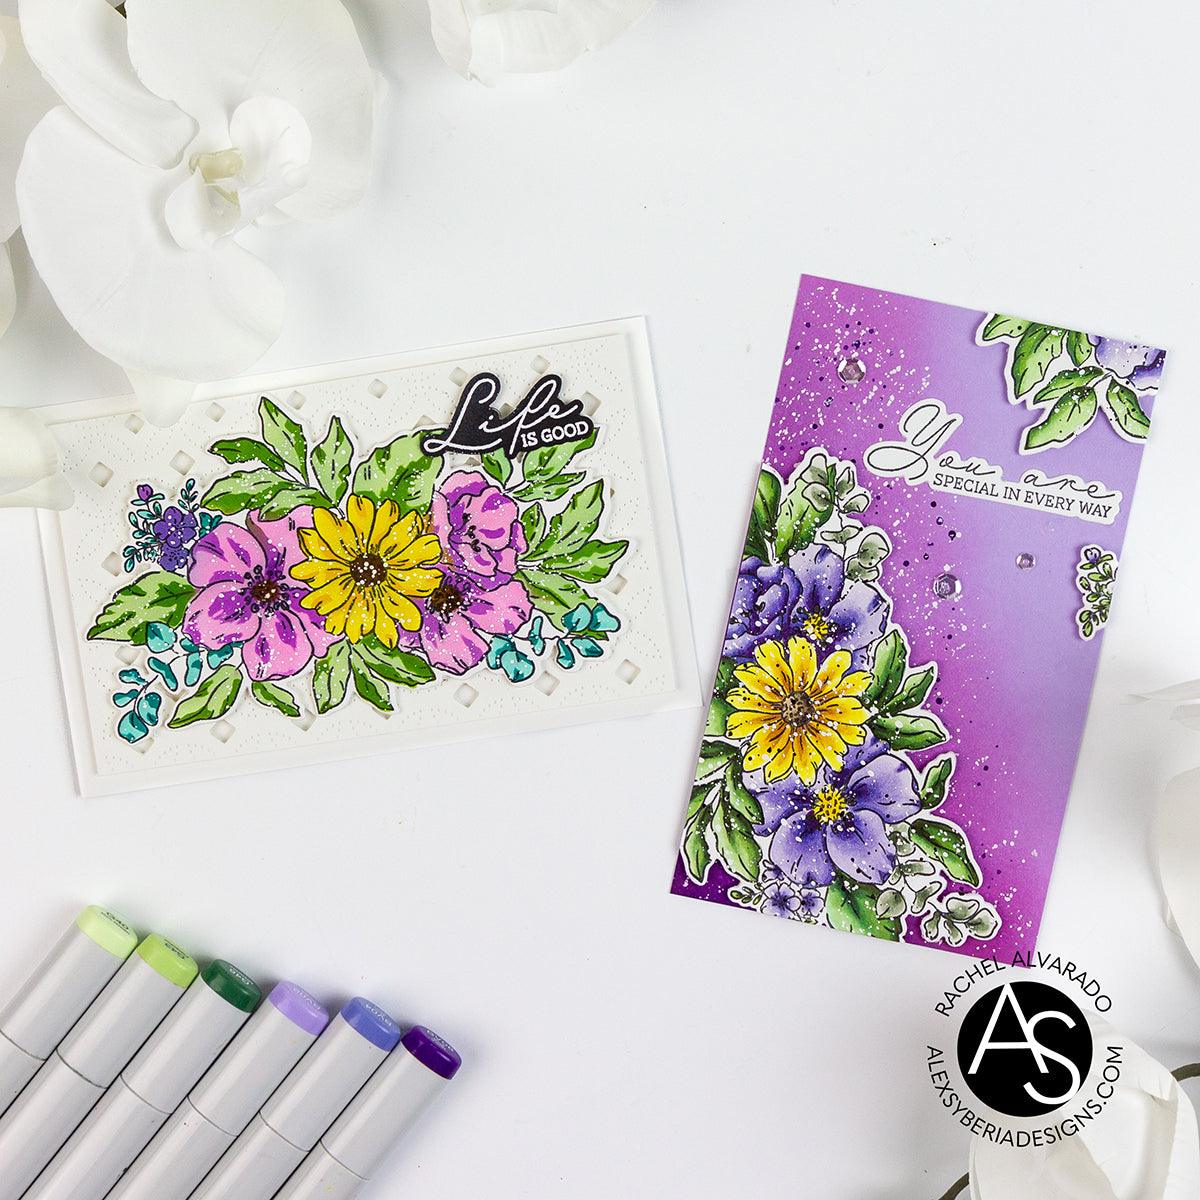 Life-is-good-die-set-alex-syberia-designs-bouquet-layering-stamps-cardmaking-coloring-popular-brands-stencils-copic-markers-tips-slim-line-cards